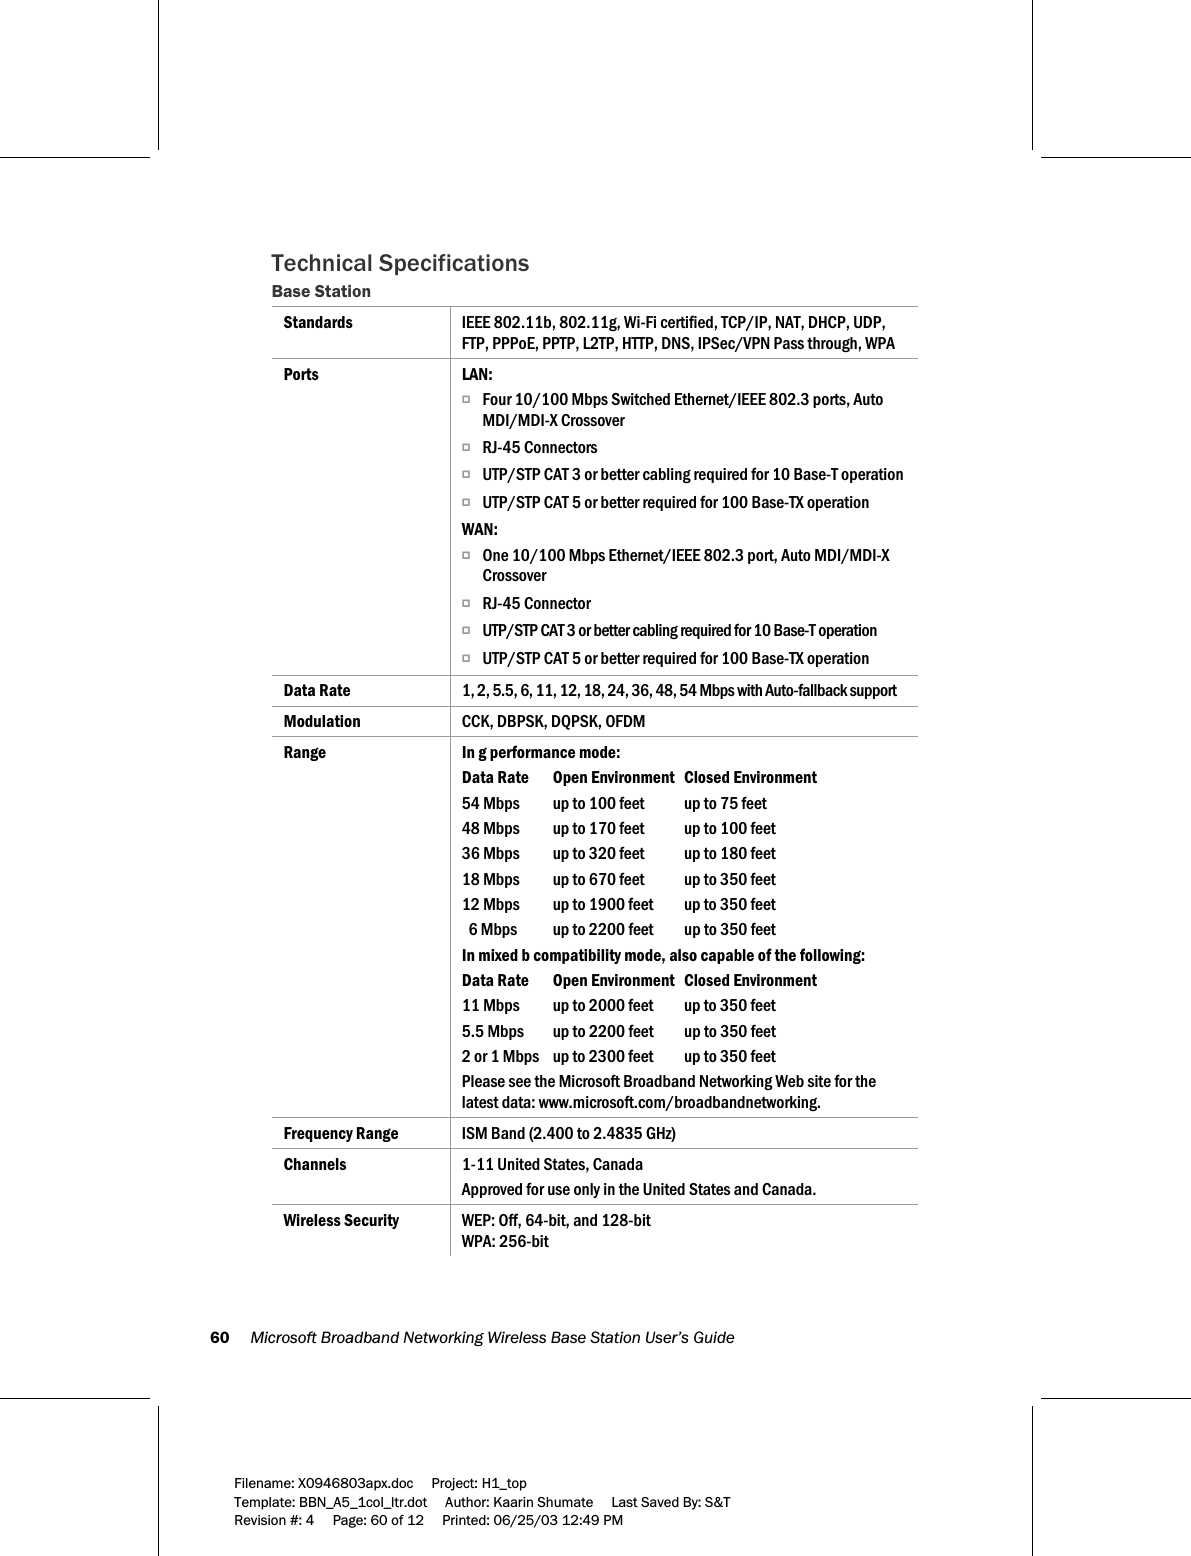 60     Microsoft Broadband Networking Wireless Base Station User’s Guide  Filename: X0946803apx.doc     Project: H1_top    Template: BBN_A5_1col_ltr.dot     Author: Kaarin Shumate     Last Saved By: S&amp;T Revision #: 4     Page: 60 of 12     Printed: 06/25/03 12:49 PM  Technical Specifications  Base Station Standards  IEEE 802.11b, 802.11g, Wi-Fi certified, TCP/IP, NAT, DHCP, UDP, FTP, PPPoE, PPTP, L2TP, HTTP, DNS, IPSec/VPN Pass through, WPA Ports LAN: O Four 10/100 Mbps Switched Ethernet/IEEE 802.3 ports, Auto MDI/MDI-X Crossover O RJ-45 Connectors O UTP/STP CAT 3 or better cabling required for 10 Base-T operation O UTP/STP CAT 5 or better required for 100 Base-TX operation WAN: O One 10/100 Mbps Ethernet/IEEE 802.3 port, Auto MDI/MDI-X Crossover O RJ-45 Connector O UTP/STP CAT 3 or better cabling required for 10 Base-T operation O UTP/STP CAT 5 or better required for 100 Base-TX operation Data Rate   1, 2, 5.5, 6, 11, 12, 18, 24, 36, 48, 54 Mbps with Auto-fallback support Modulation   CCK, DBPSK, DQPSK, OFDM Range  In g performance mode: Data Rate   Open Environment   Closed Environment 54 Mbps  up to 100 feet  up to 75 feet 48 Mbps  up to 170 feet  up to 100 feet 36 Mbps  up to 320 feet  up to 180 feet 18 Mbps  up to 670 feet  up to 350 feet 12 Mbps  up to 1900 feet  up to 350 feet   6 Mbps  up to 2200 feet  up to 350 feet In mixed b compatibility mode, also capable of the following: Data Rate   Open Environment   Closed Environment 11 Mbps  up to 2000 feet  up to 350 feet 5.5 Mbps  up to 2200 feet  up to 350 feet 2 or 1 Mbps  up to 2300 feet  up to 350 feet Please see the Microsoft Broadband Networking Web site for the latest data: www.microsoft.com/broadbandnetworking. Frequency Range  ISM Band (2.400 to 2.4835 GHz) Channels  1-11 United States, Canada Approved for use only in the United States and Canada. Wireless Security  WEP: Off, 64-bit, and 128-bit WPA: 256-bit 